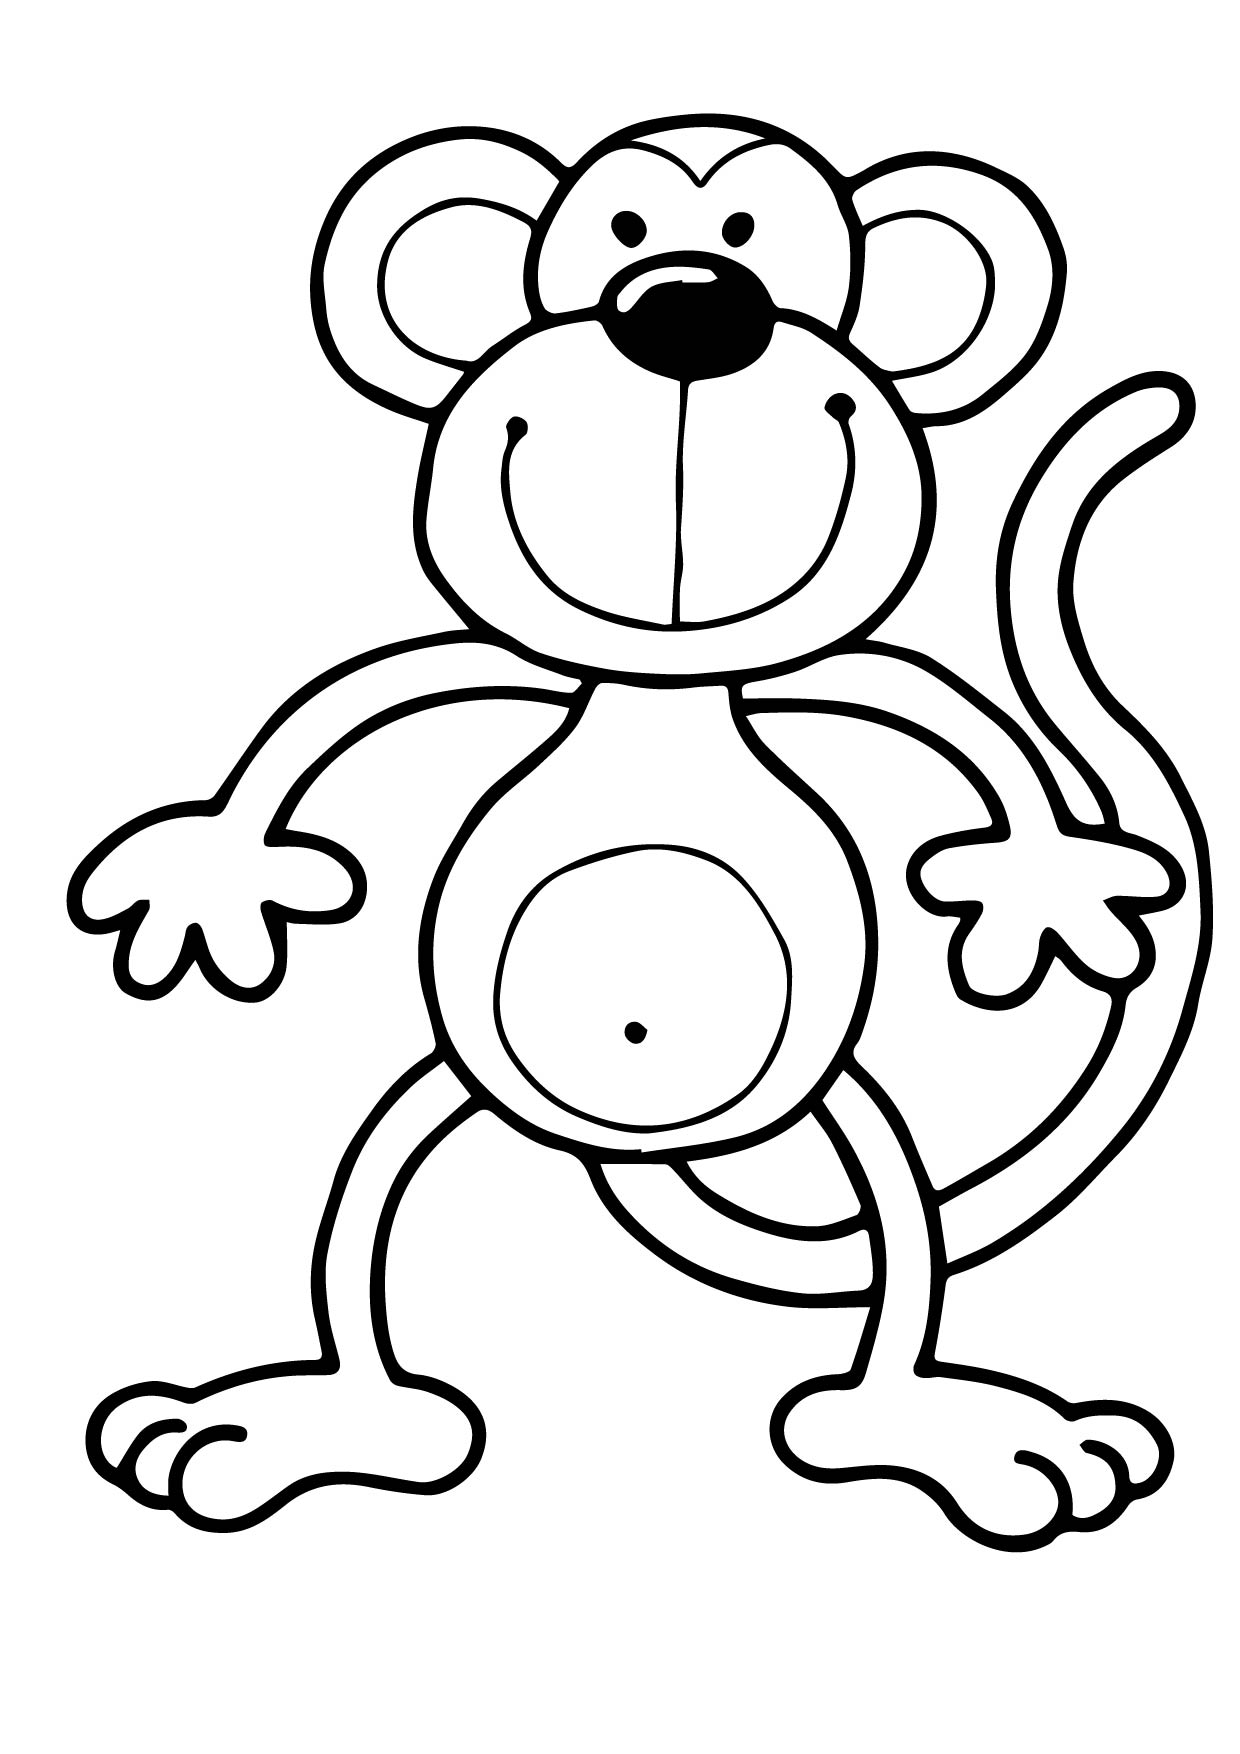 Monkey Coloring Pages | Wecoloringpage